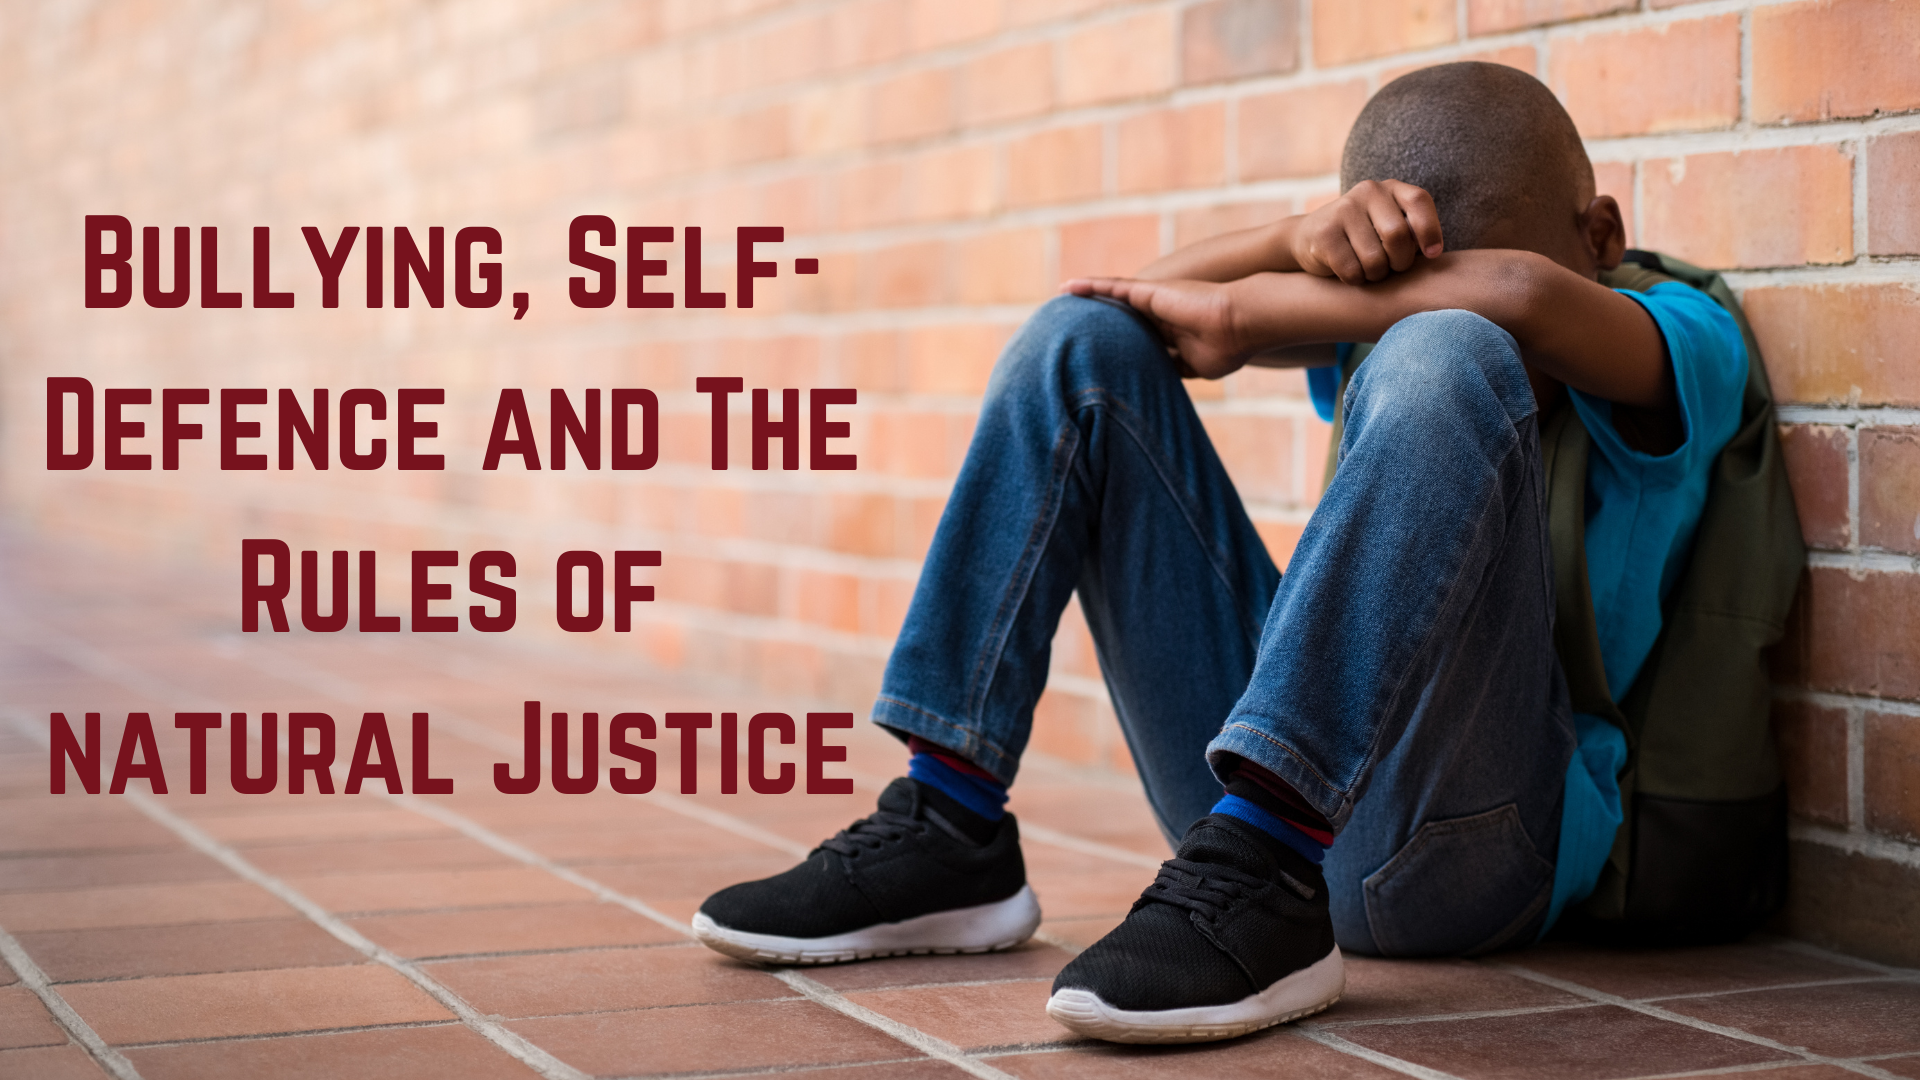 Bullying, Self-Defence and The Rules of Natural Justice